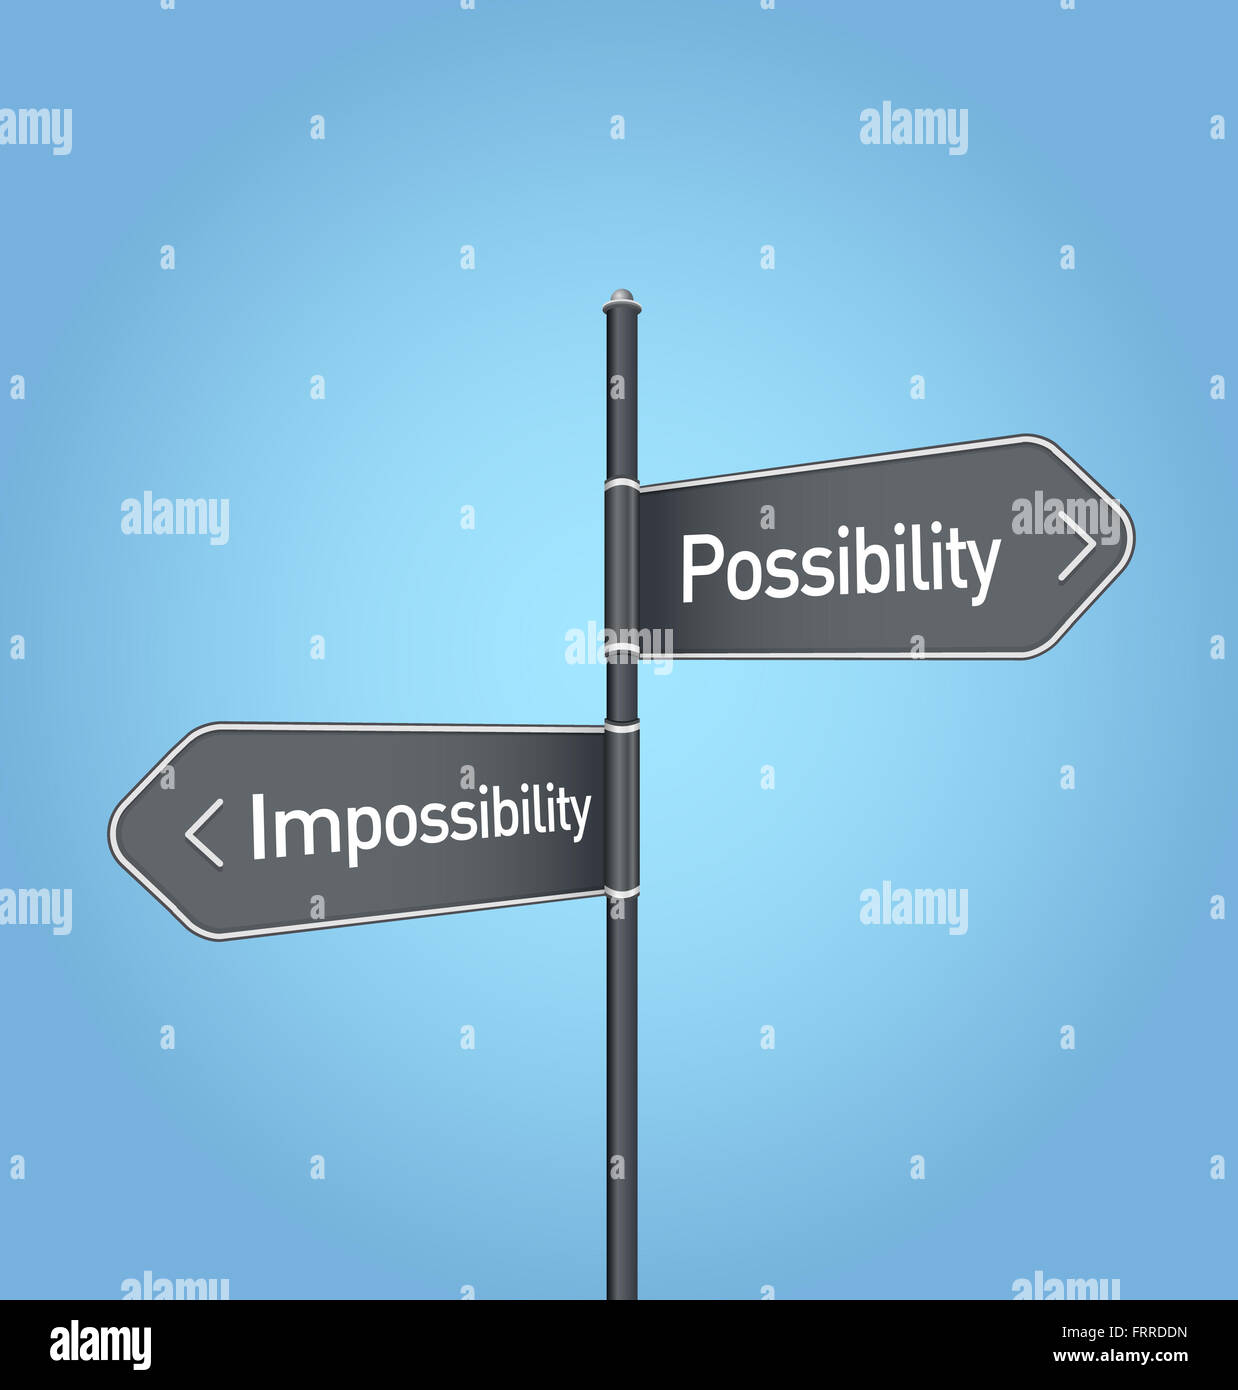 Possibility vs impossibility choice concept road sign on blue background Stock Photo